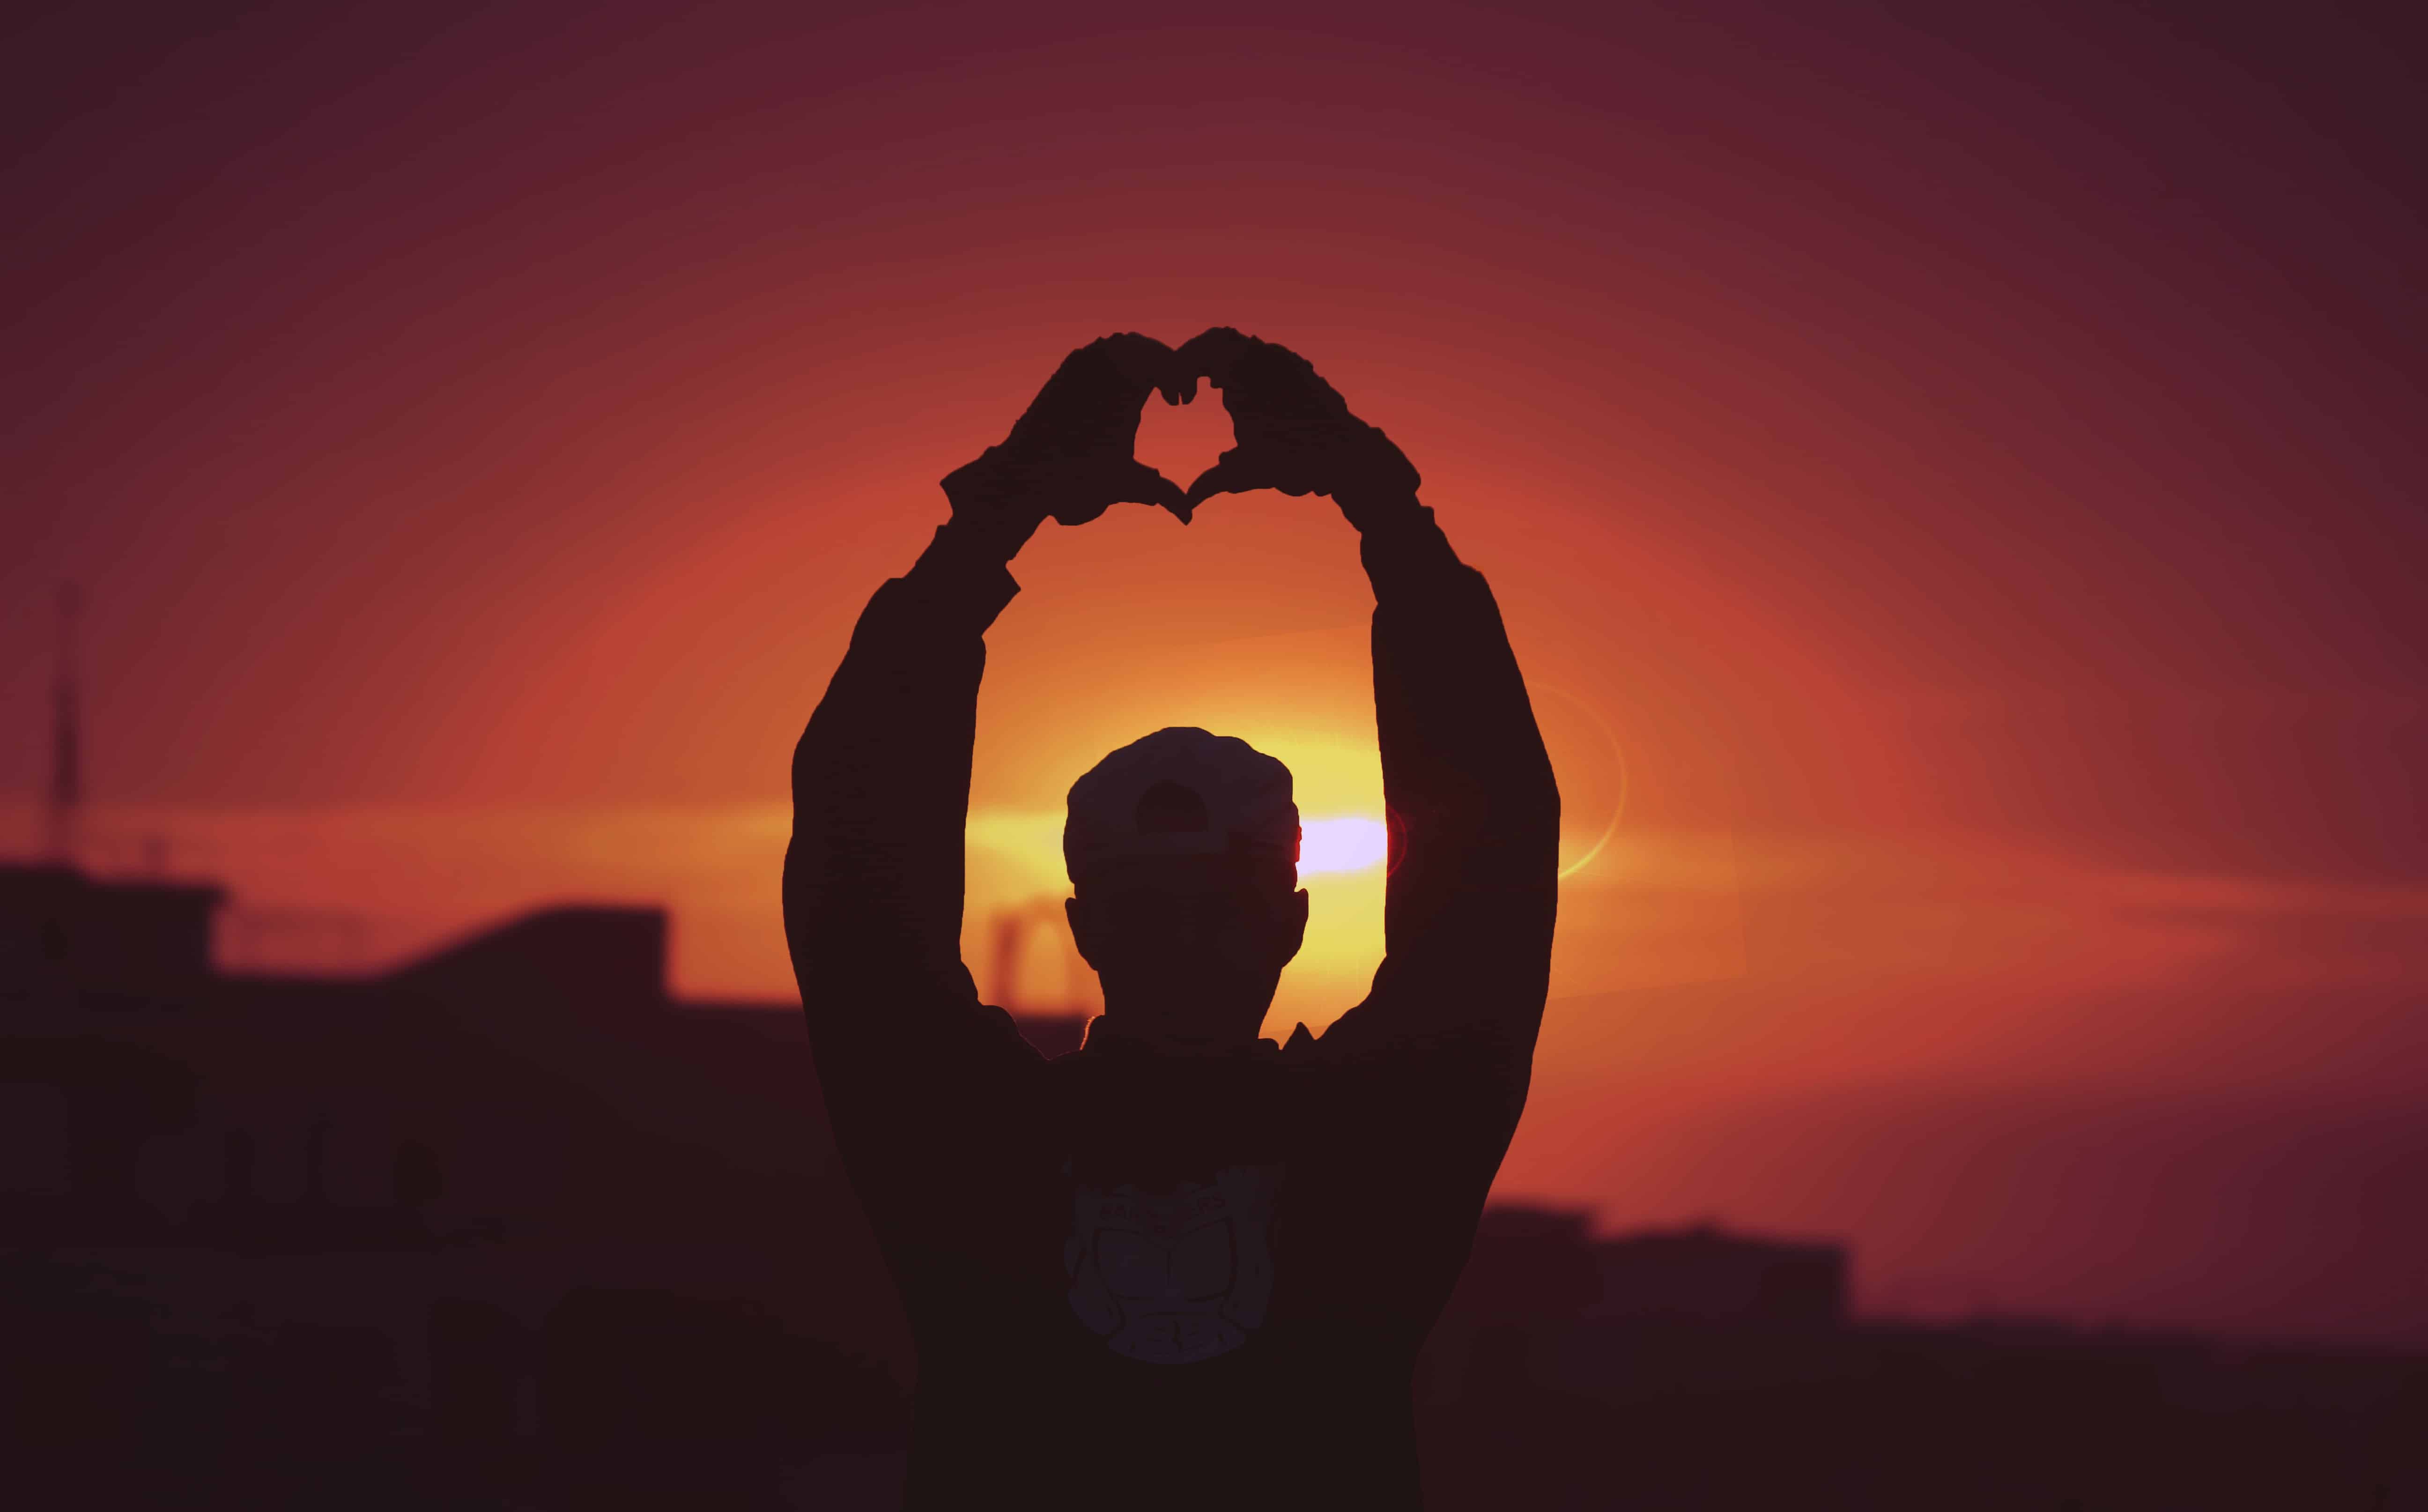 A man making a heart with his hands